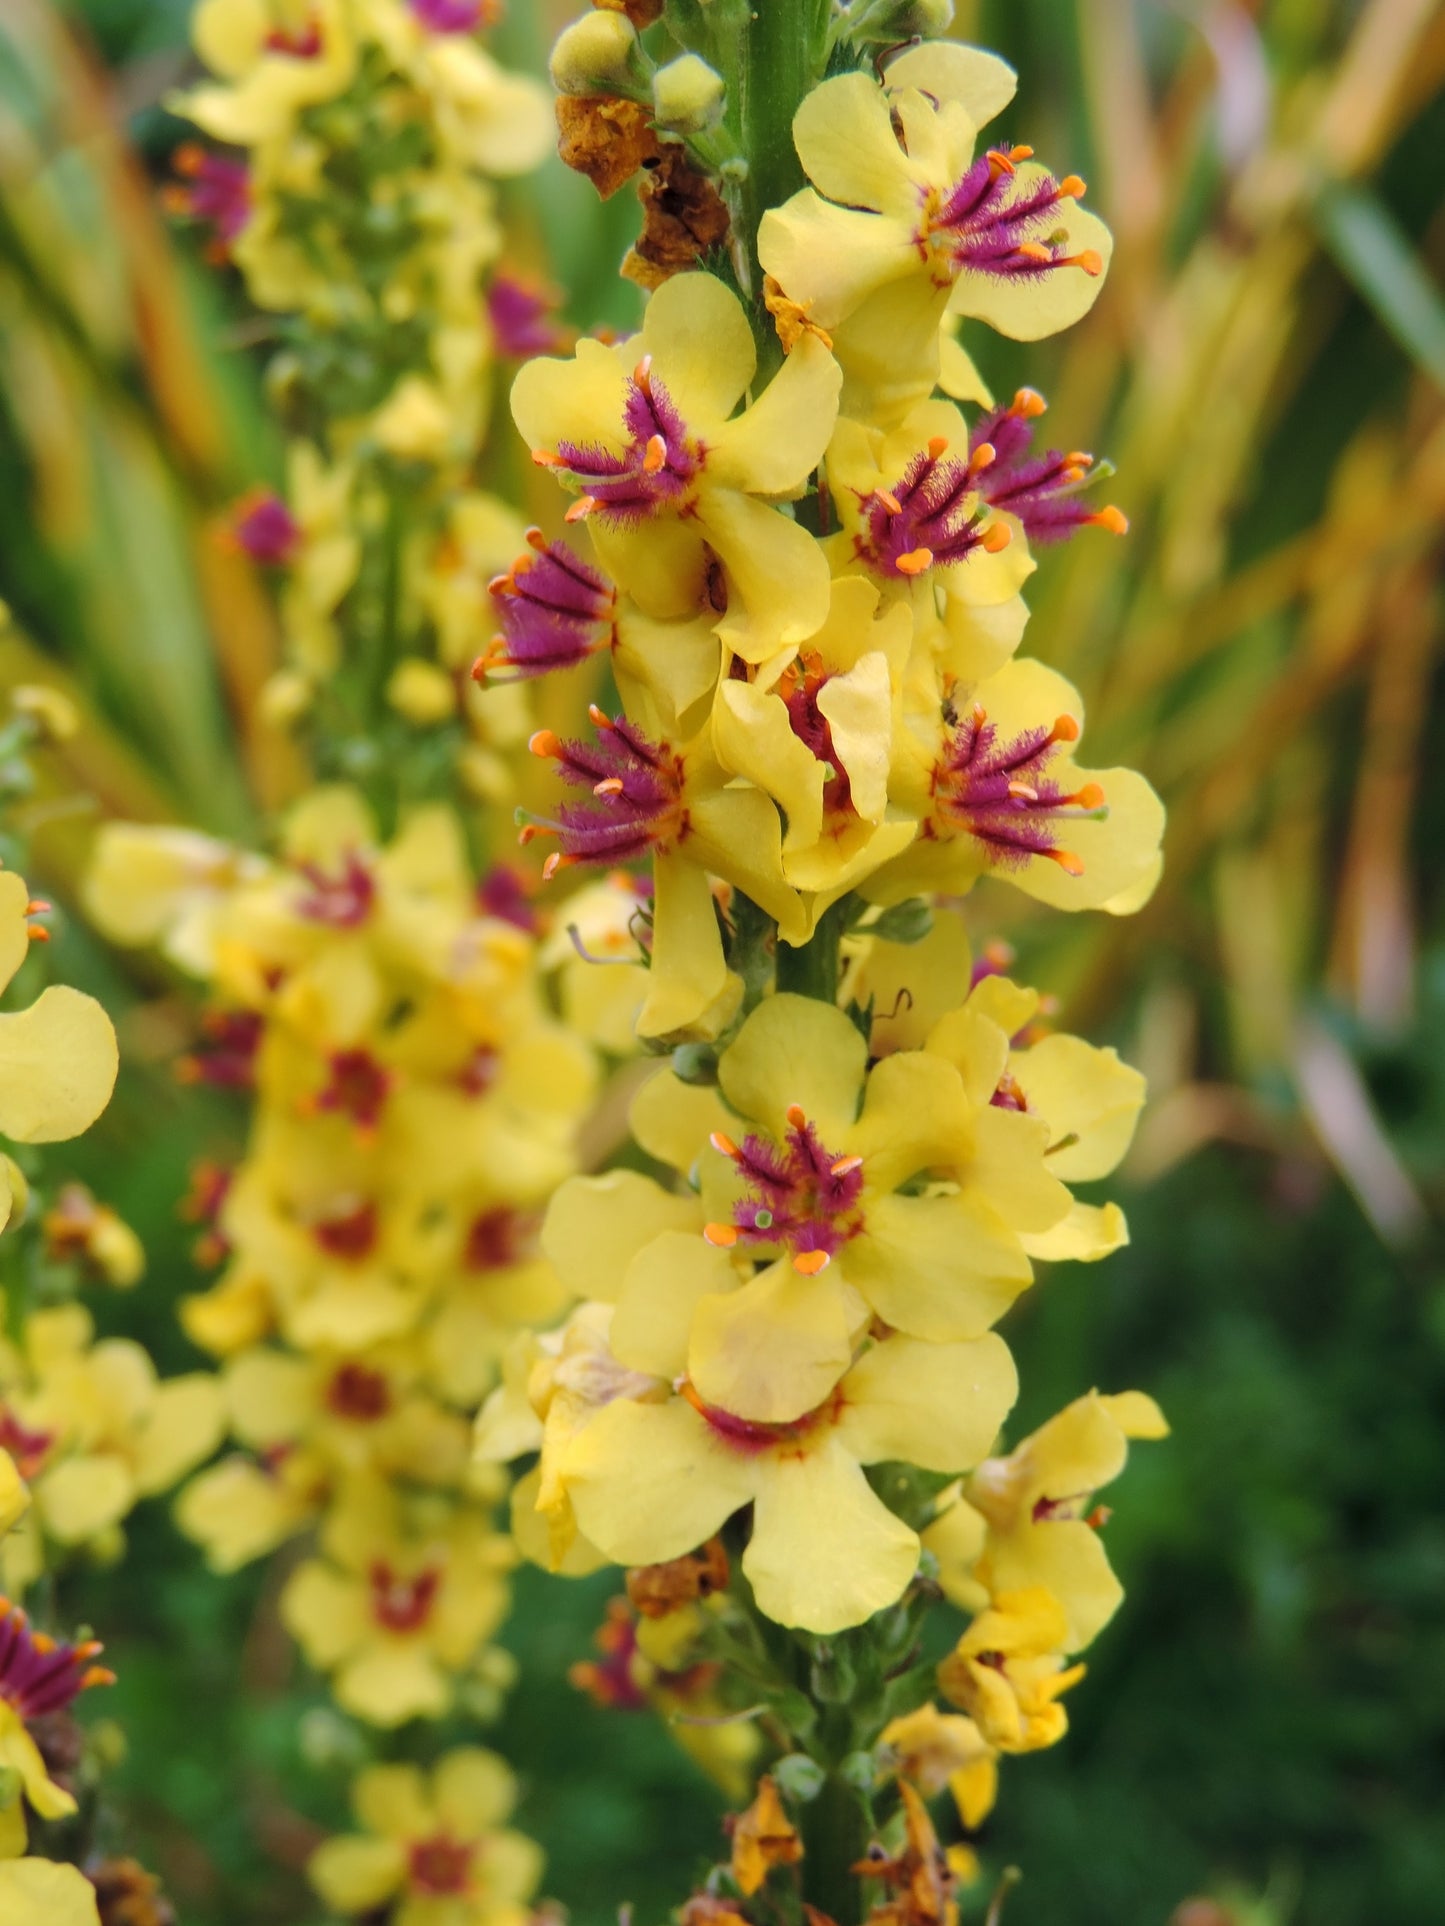 150 YELLOW VERBASCUM Thapsus Common Mullein Flower Herb Seeds